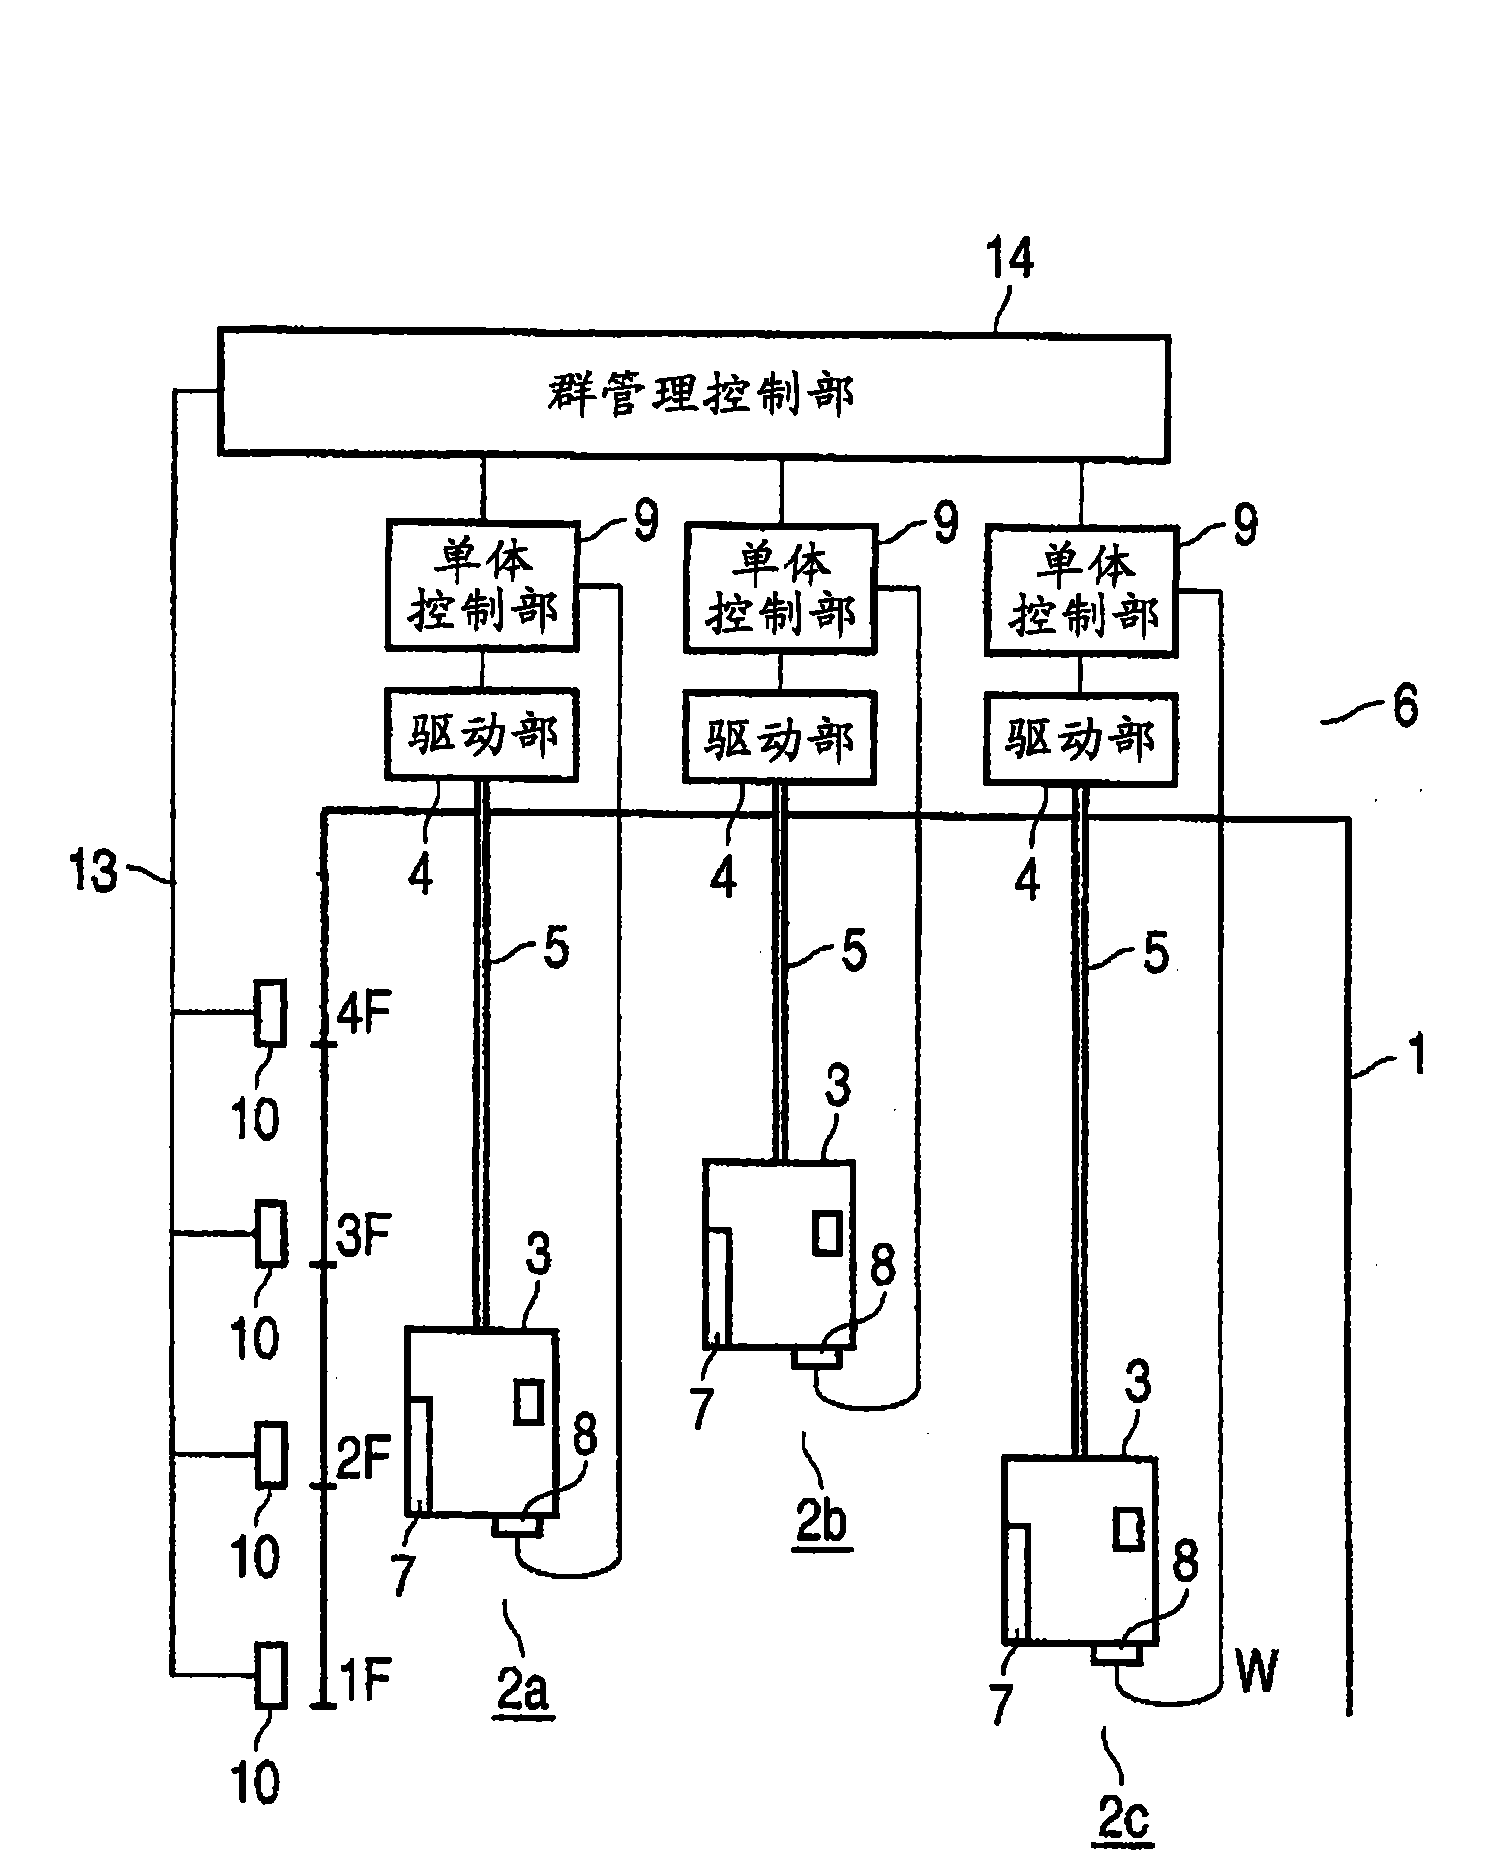 Operation controller of elevator system